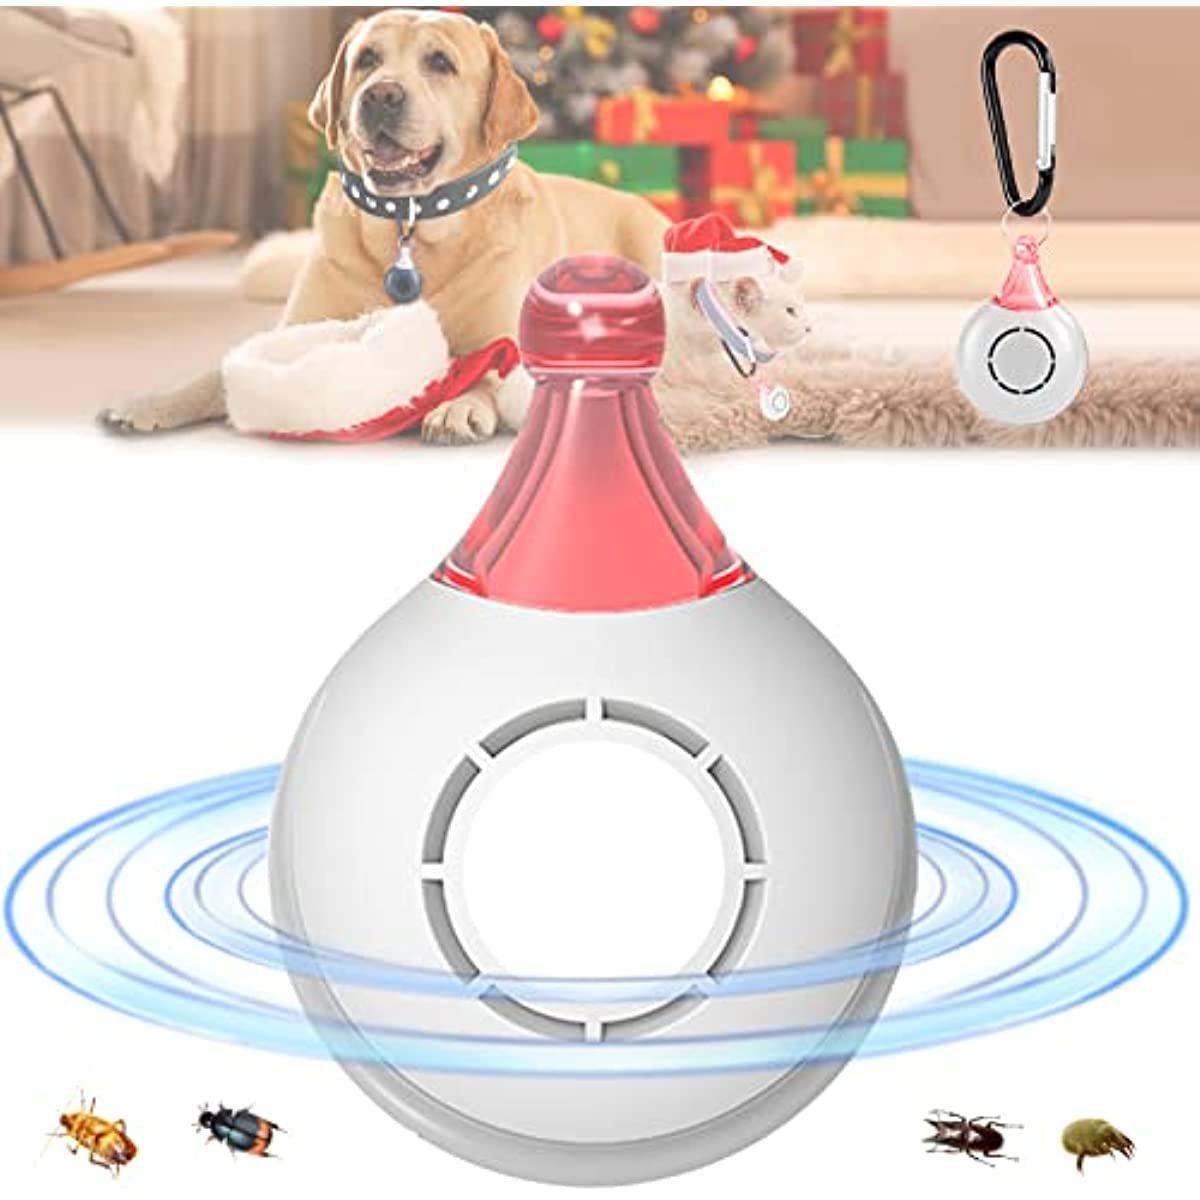 Ultrasonic; Natural; Chemical-Free Tick and Flea Repeller - Flea and Tick Treatment for Dogs; 2 pack; Ultrasonic Flea and Tick Repeller for Dogs and Cats